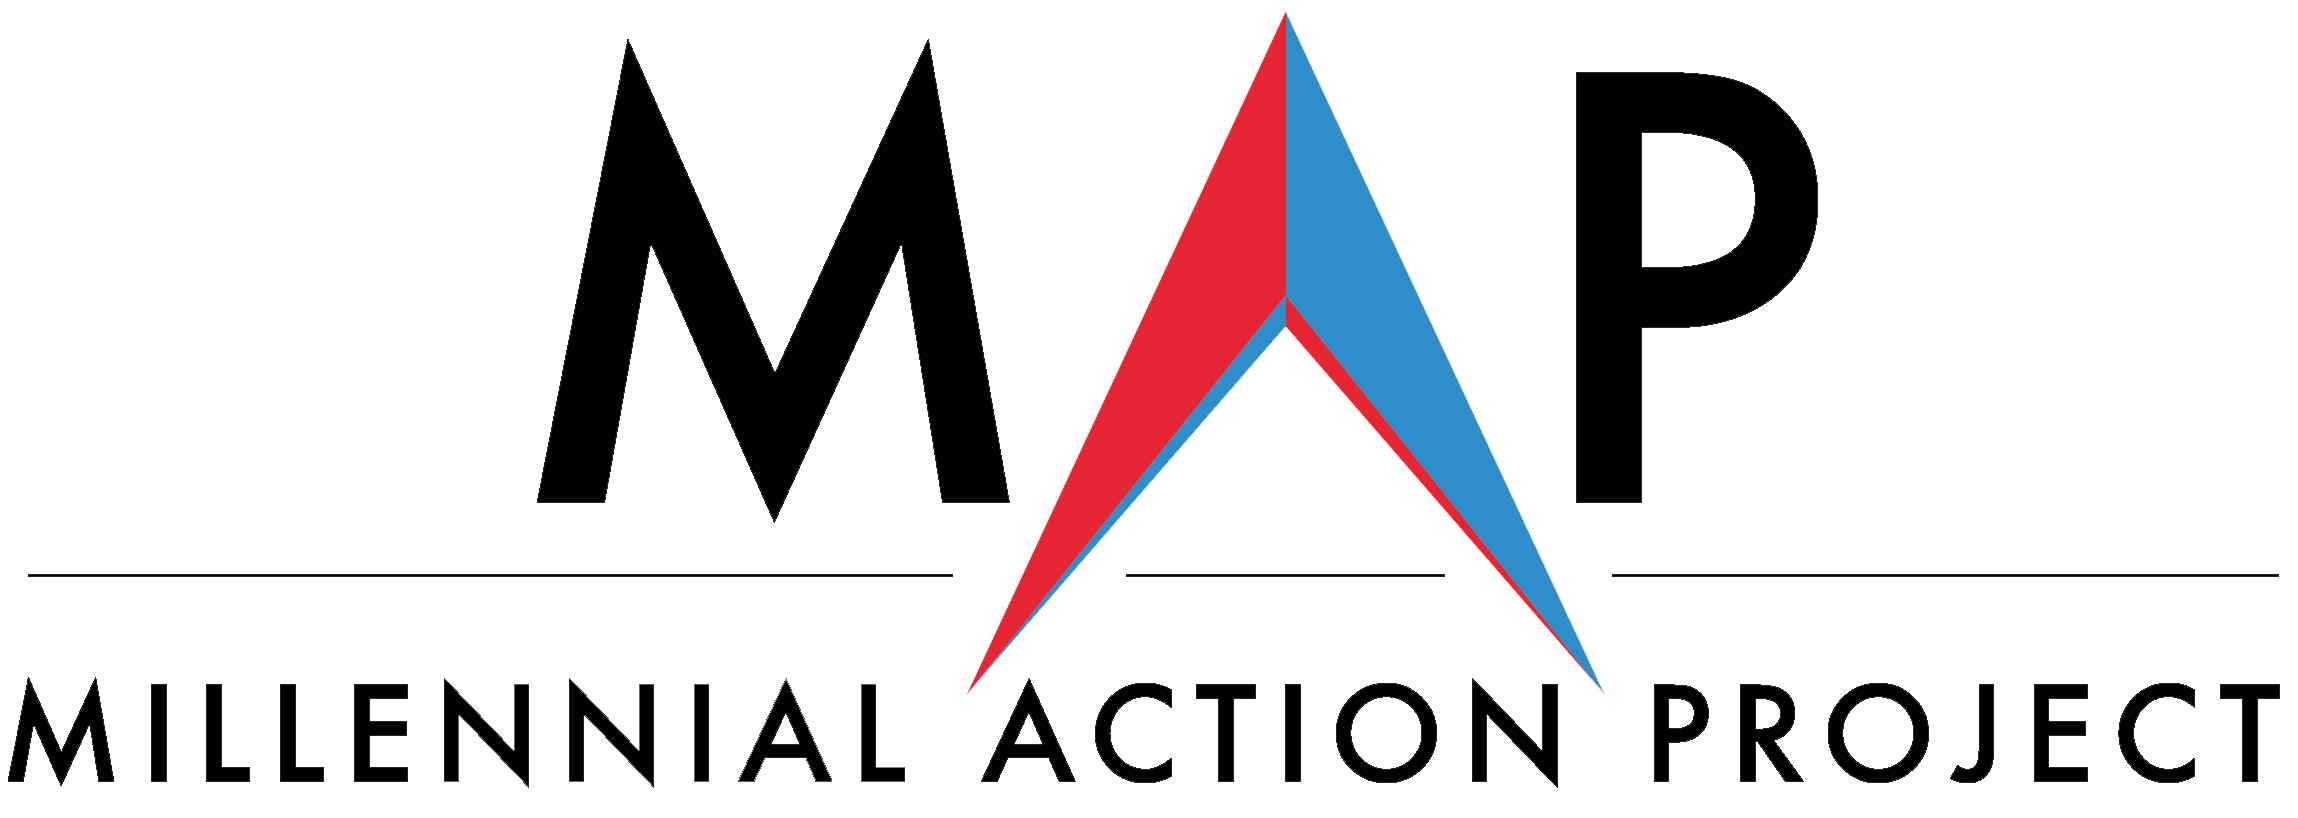 Millennial Action Project logo